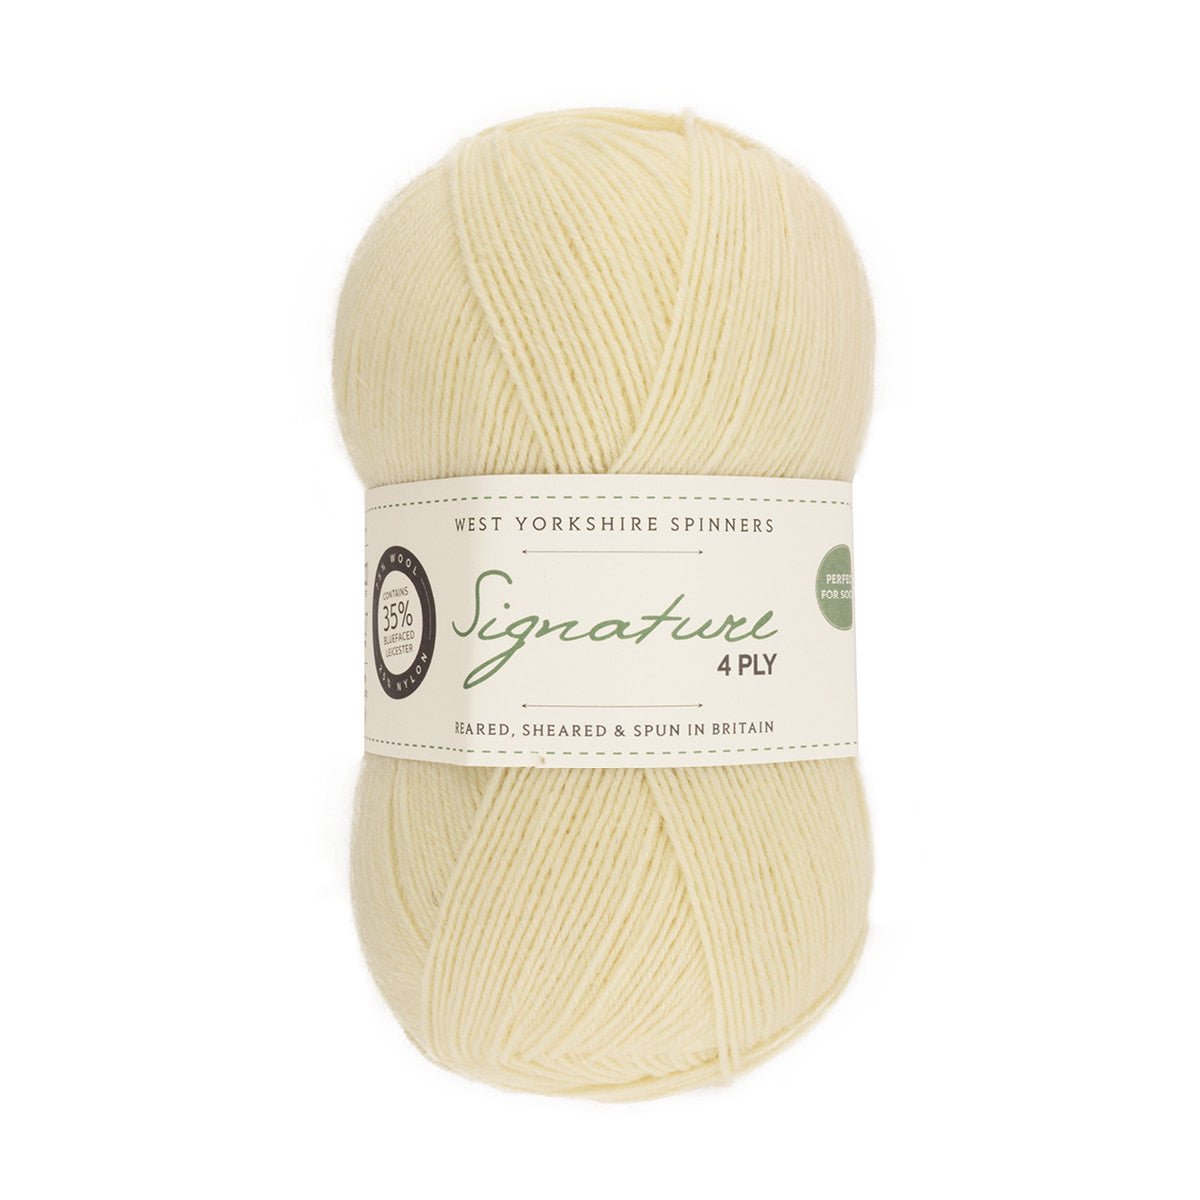 SIGNATURE 4PLY 010-Milk Bottle - West Yorkshire Spinners